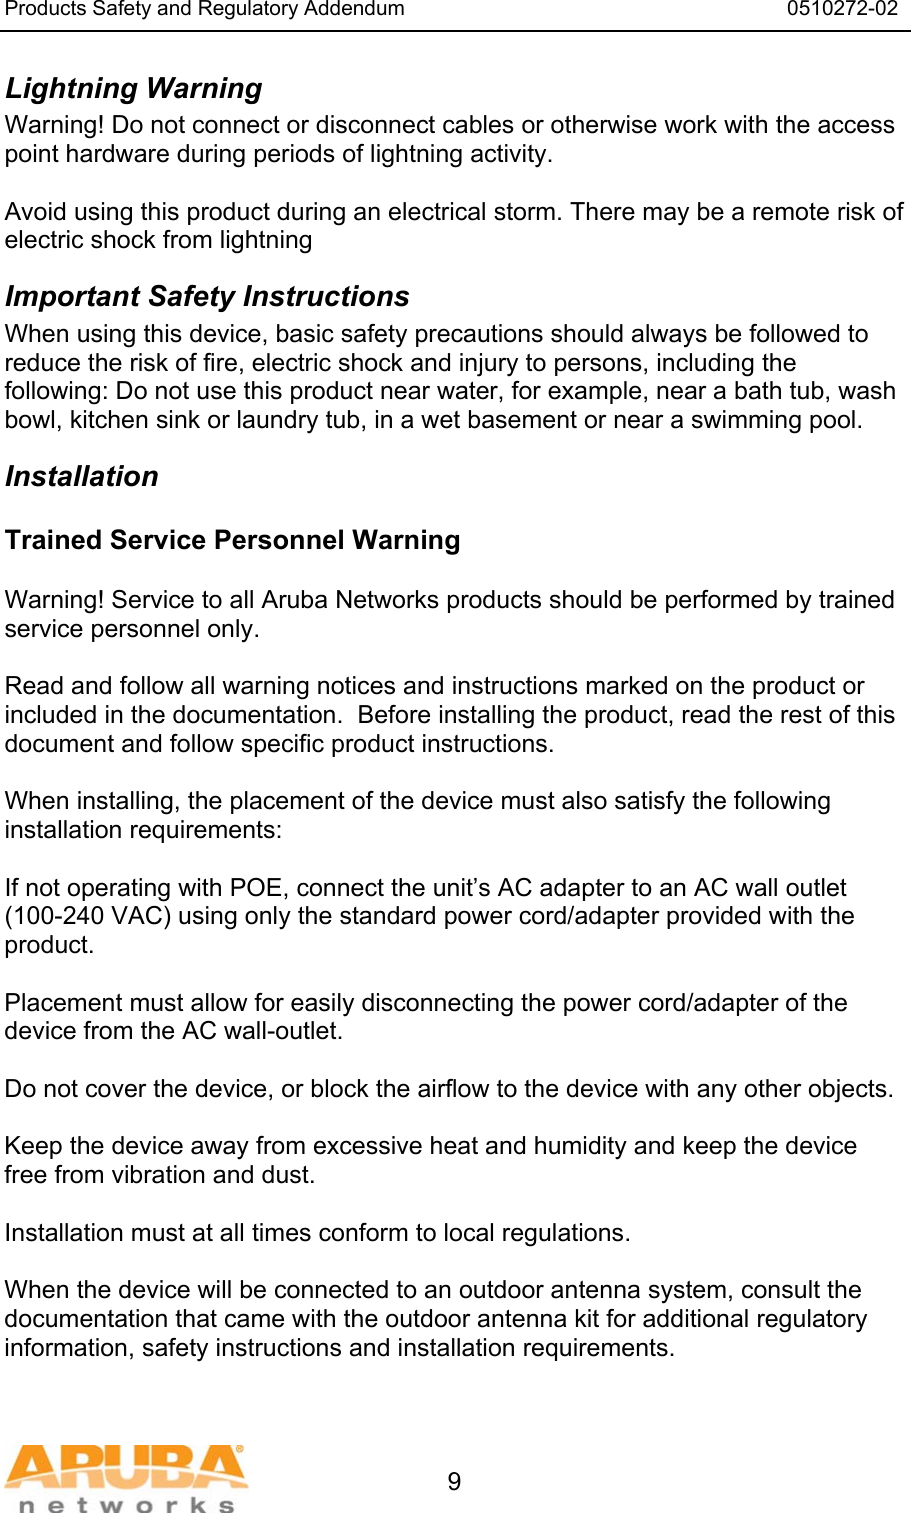 Products Safety and Regulatory Addendum                                                                  0510272-02   9 Lightning Warning Warning! Do not connect or disconnect cables or otherwise work with the access point hardware during periods of lightning activity.  Avoid using this product during an electrical storm. There may be a remote risk of electric shock from lightning Important Safety Instructions When using this device, basic safety precautions should always be followed to reduce the risk of fire, electric shock and injury to persons, including the following: Do not use this product near water, for example, near a bath tub, wash bowl, kitchen sink or laundry tub, in a wet basement or near a swimming pool. Installation Trained Service Personnel Warning  Warning! Service to all Aruba Networks products should be performed by trained service personnel only.  Read and follow all warning notices and instructions marked on the product or included in the documentation.  Before installing the product, read the rest of this document and follow specific product instructions.  When installing, the placement of the device must also satisfy the following installation requirements:  If not operating with POE, connect the unit’s AC adapter to an AC wall outlet (100-240 VAC) using only the standard power cord/adapter provided with the product.  Placement must allow for easily disconnecting the power cord/adapter of the device from the AC wall-outlet.  Do not cover the device, or block the airflow to the device with any other objects.   Keep the device away from excessive heat and humidity and keep the device free from vibration and dust.  Installation must at all times conform to local regulations.  When the device will be connected to an outdoor antenna system, consult the documentation that came with the outdoor antenna kit for additional regulatory information, safety instructions and installation requirements.  